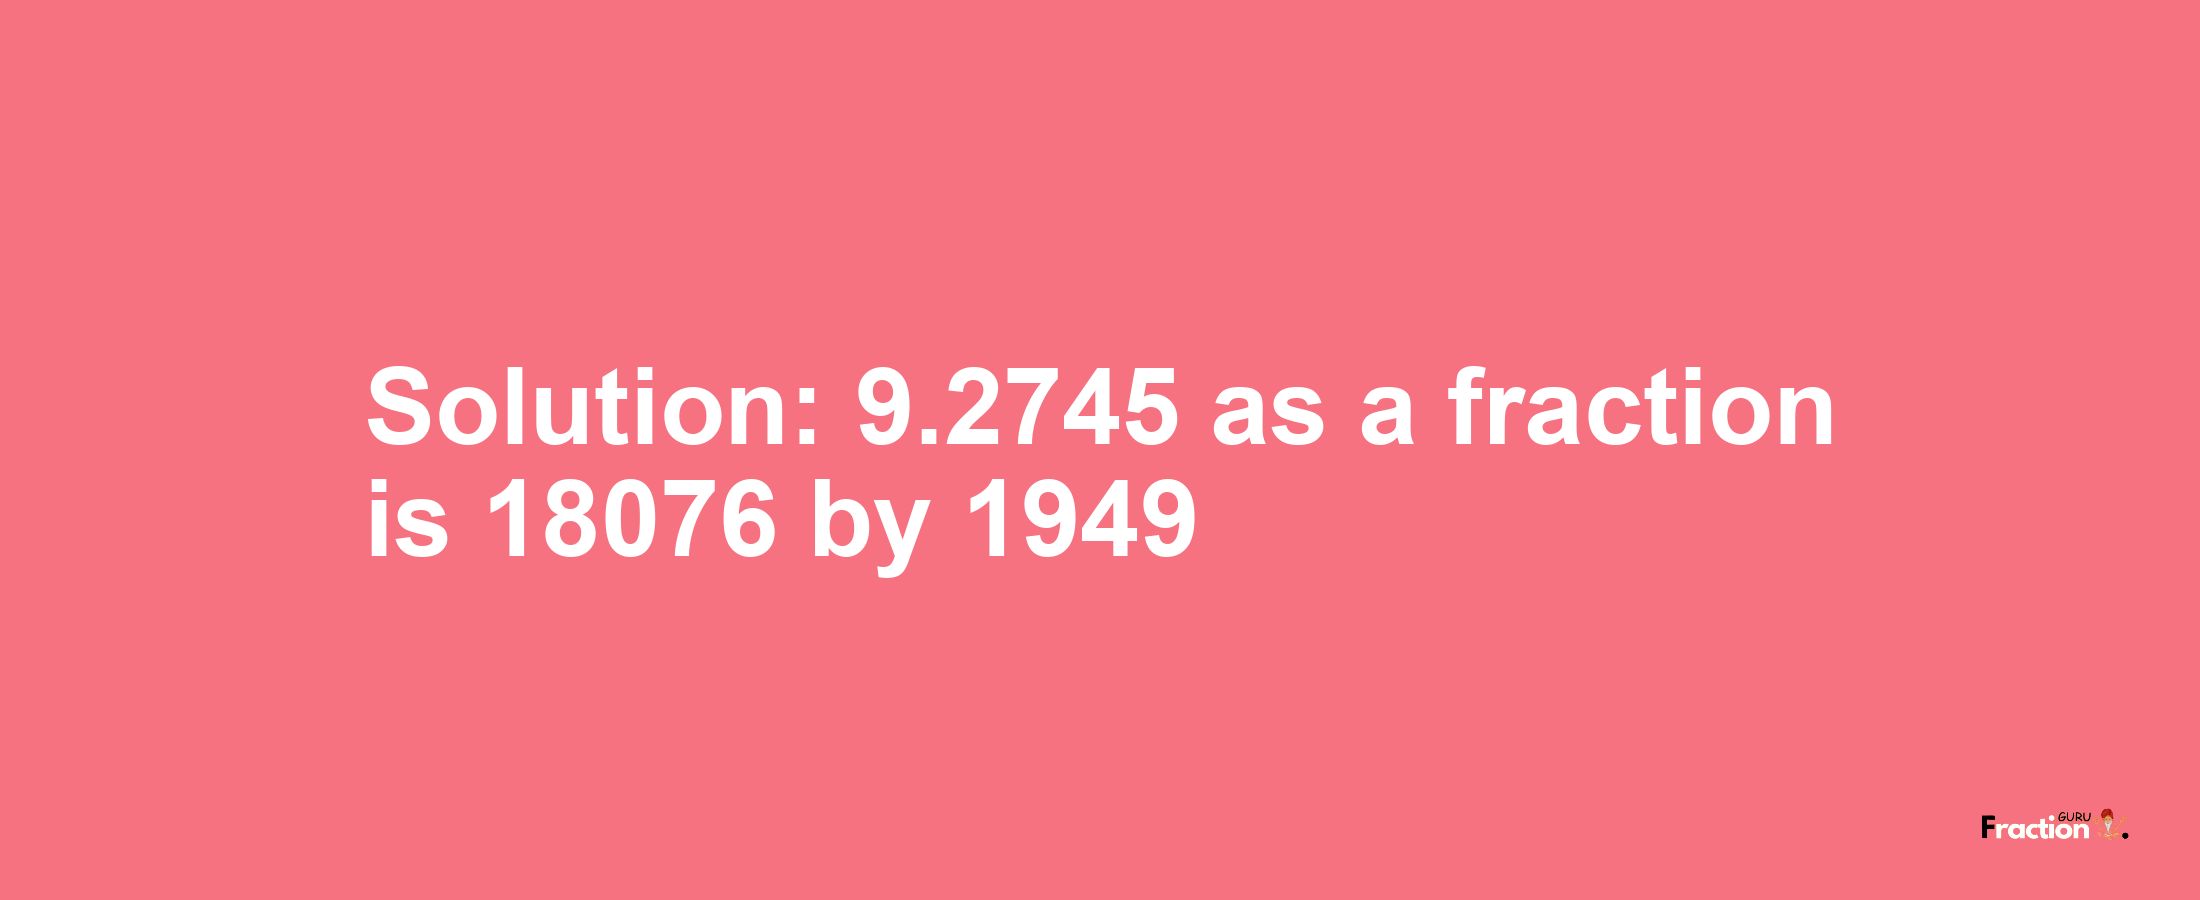 Solution:9.2745 as a fraction is 18076/1949